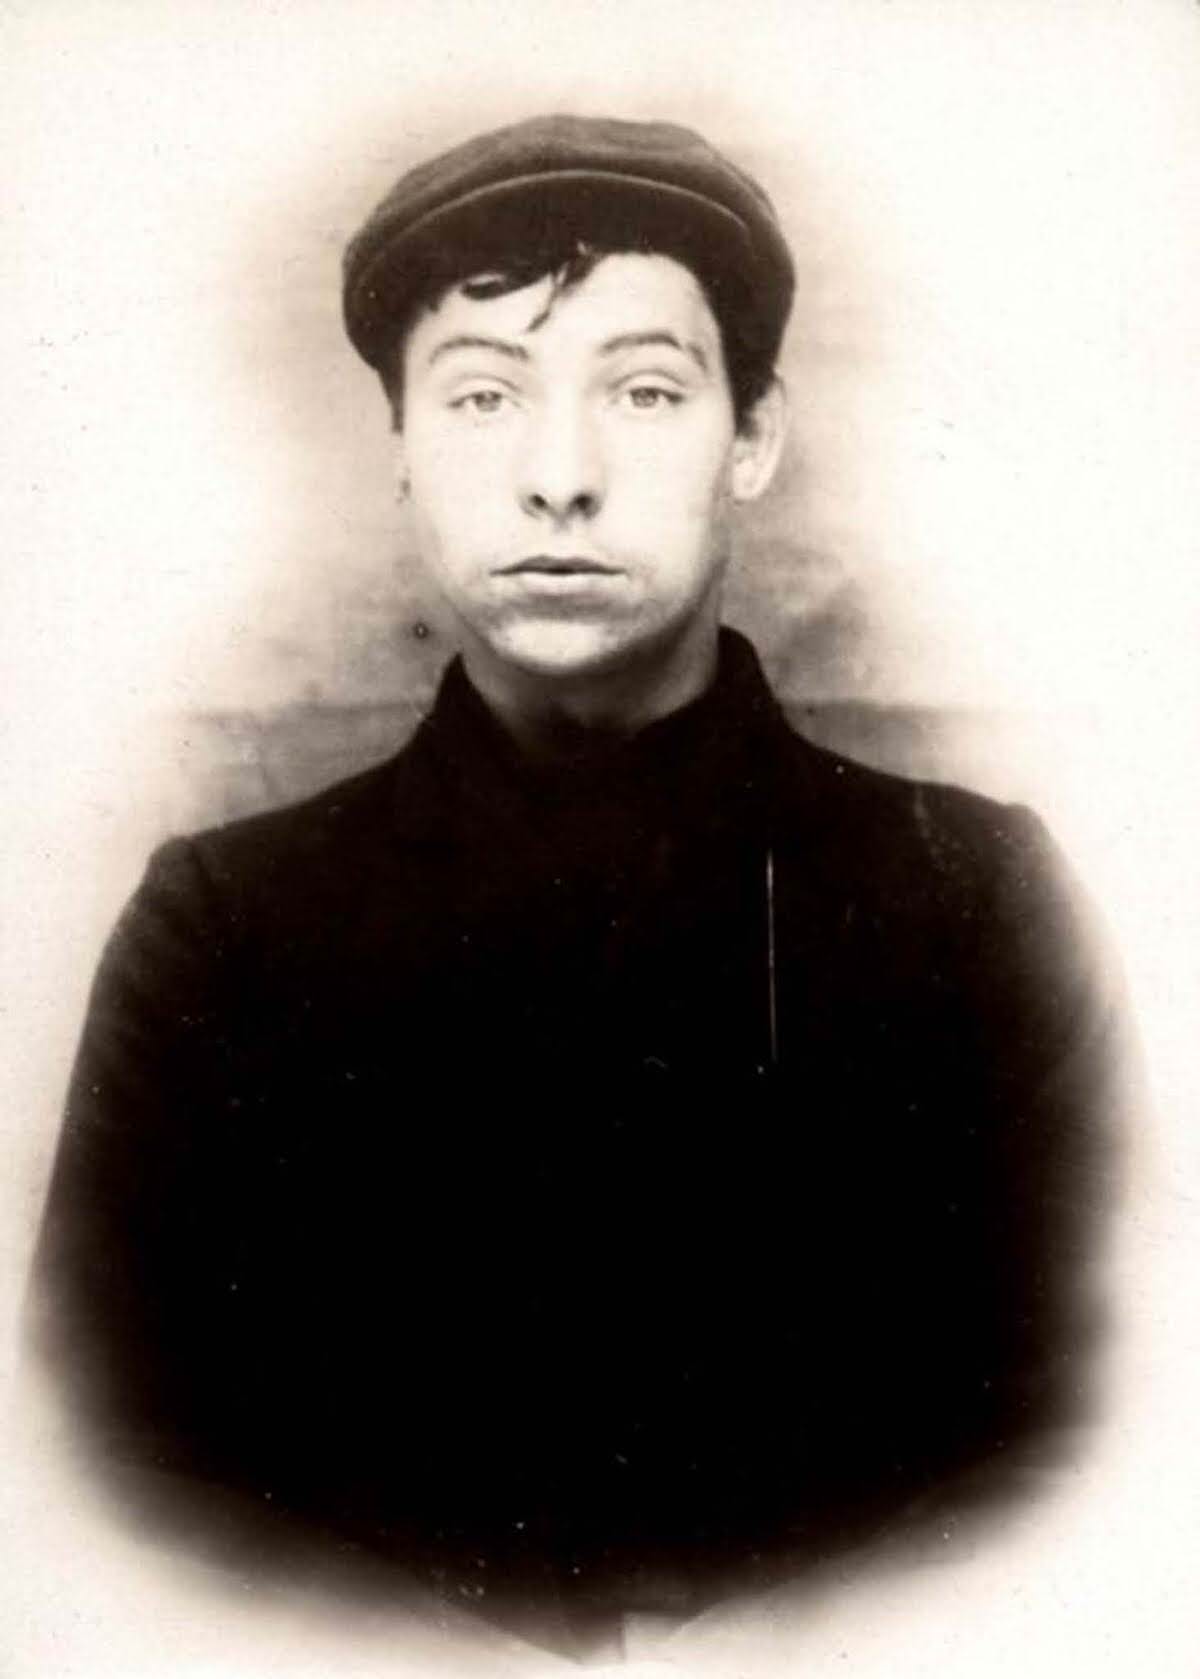 Charles Pearson, 19, arrested for stealing from offices, 1907.